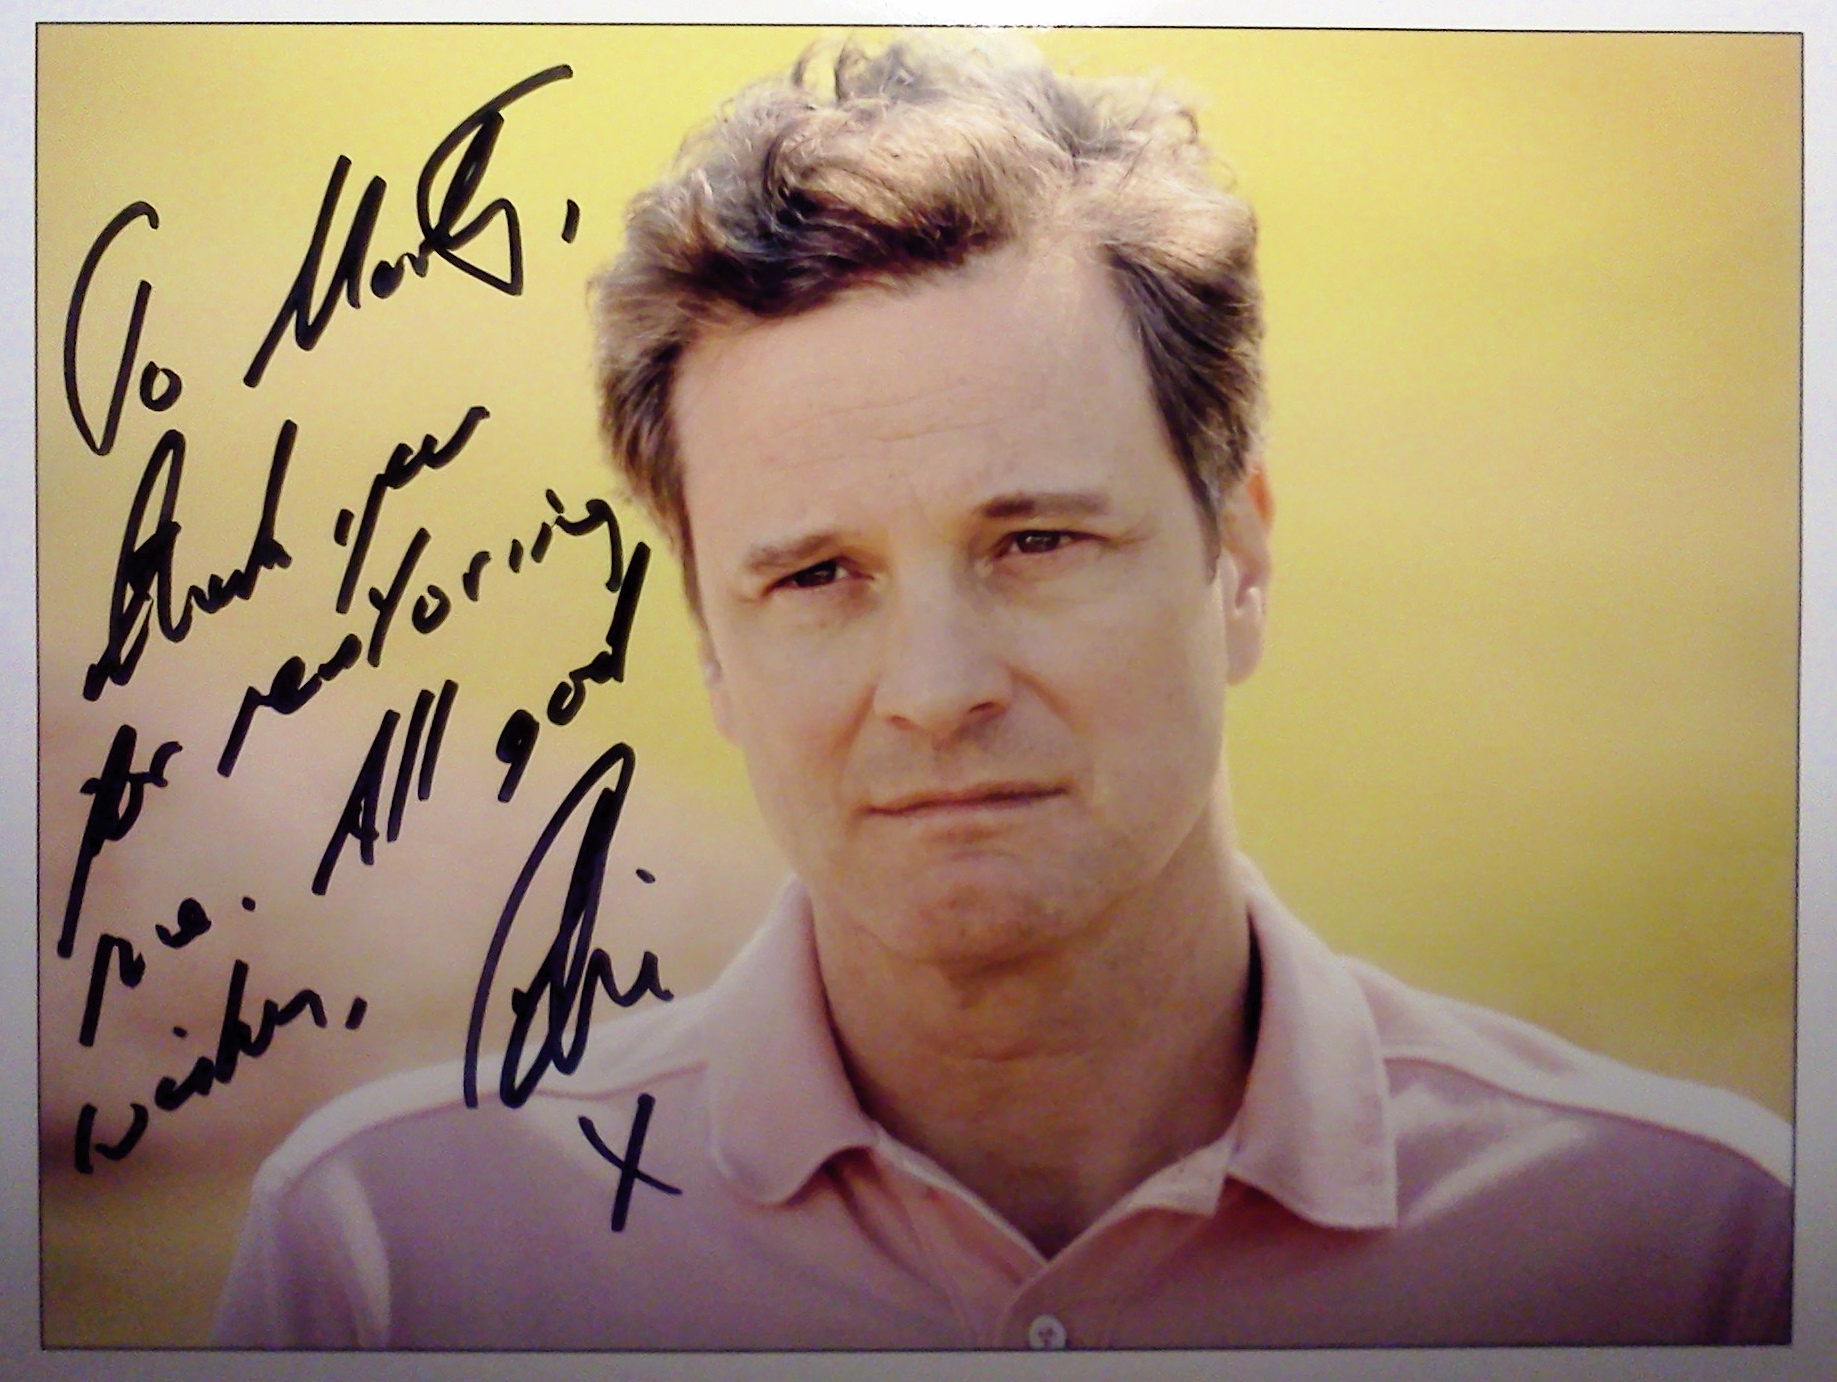 Oct/Nov 2011 - I had the honor of working with Colin Firth (as his massage-therapist) throughout the filming of Arthur Newman Golf Pro. He's an absolutely wonderful person.